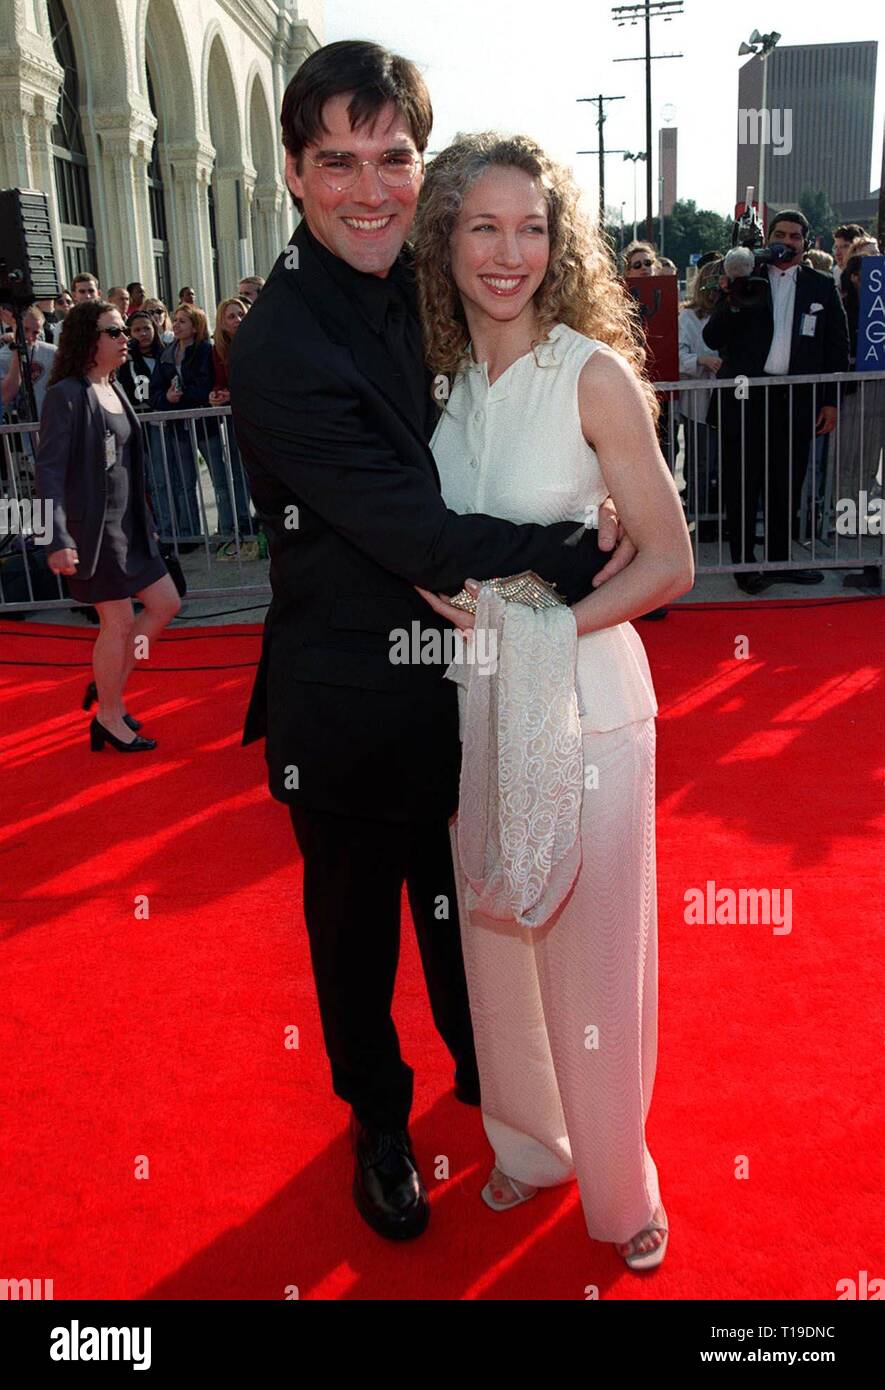 LOS ANGELES, CA - March 8, 1998: 'Dharma & Greg' star THOMAS GIBSON & wife at the Screen Actors Guild Awards in Los Angeles. Stock Photo